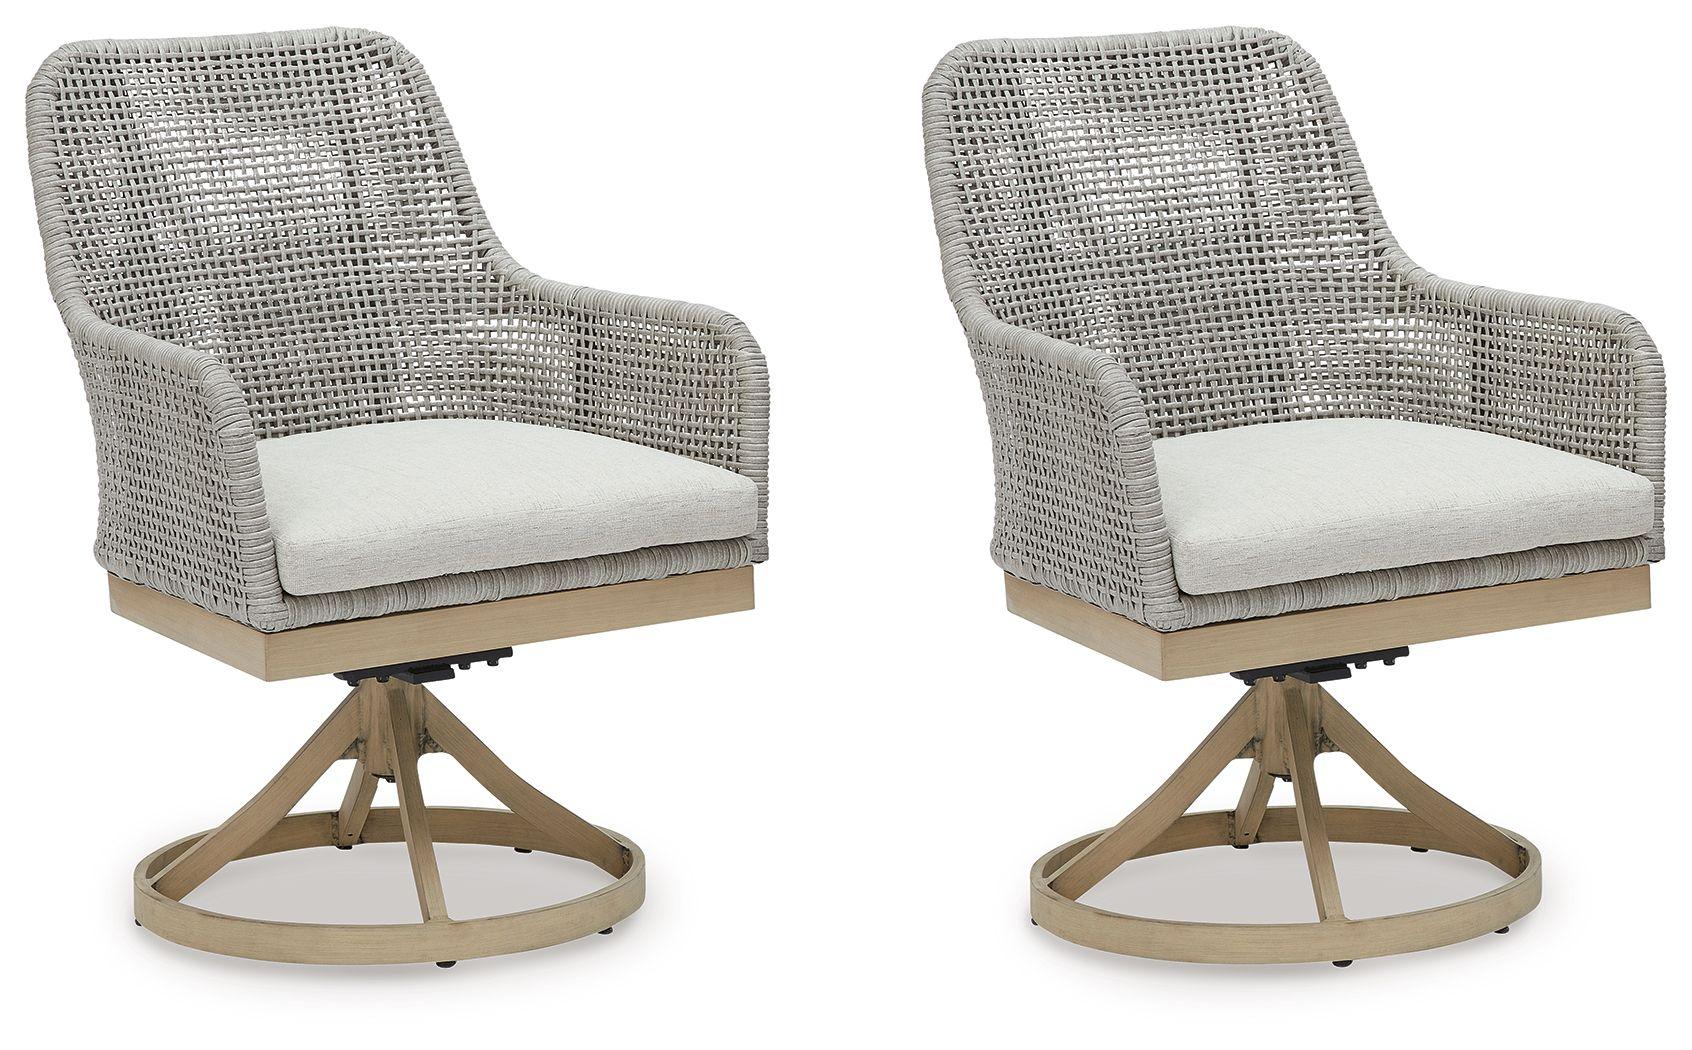 Signature Design by Ashley® - Seton Creek - Gray - Swivel Chair With Cushion (Set of 2) - 5th Avenue Furniture